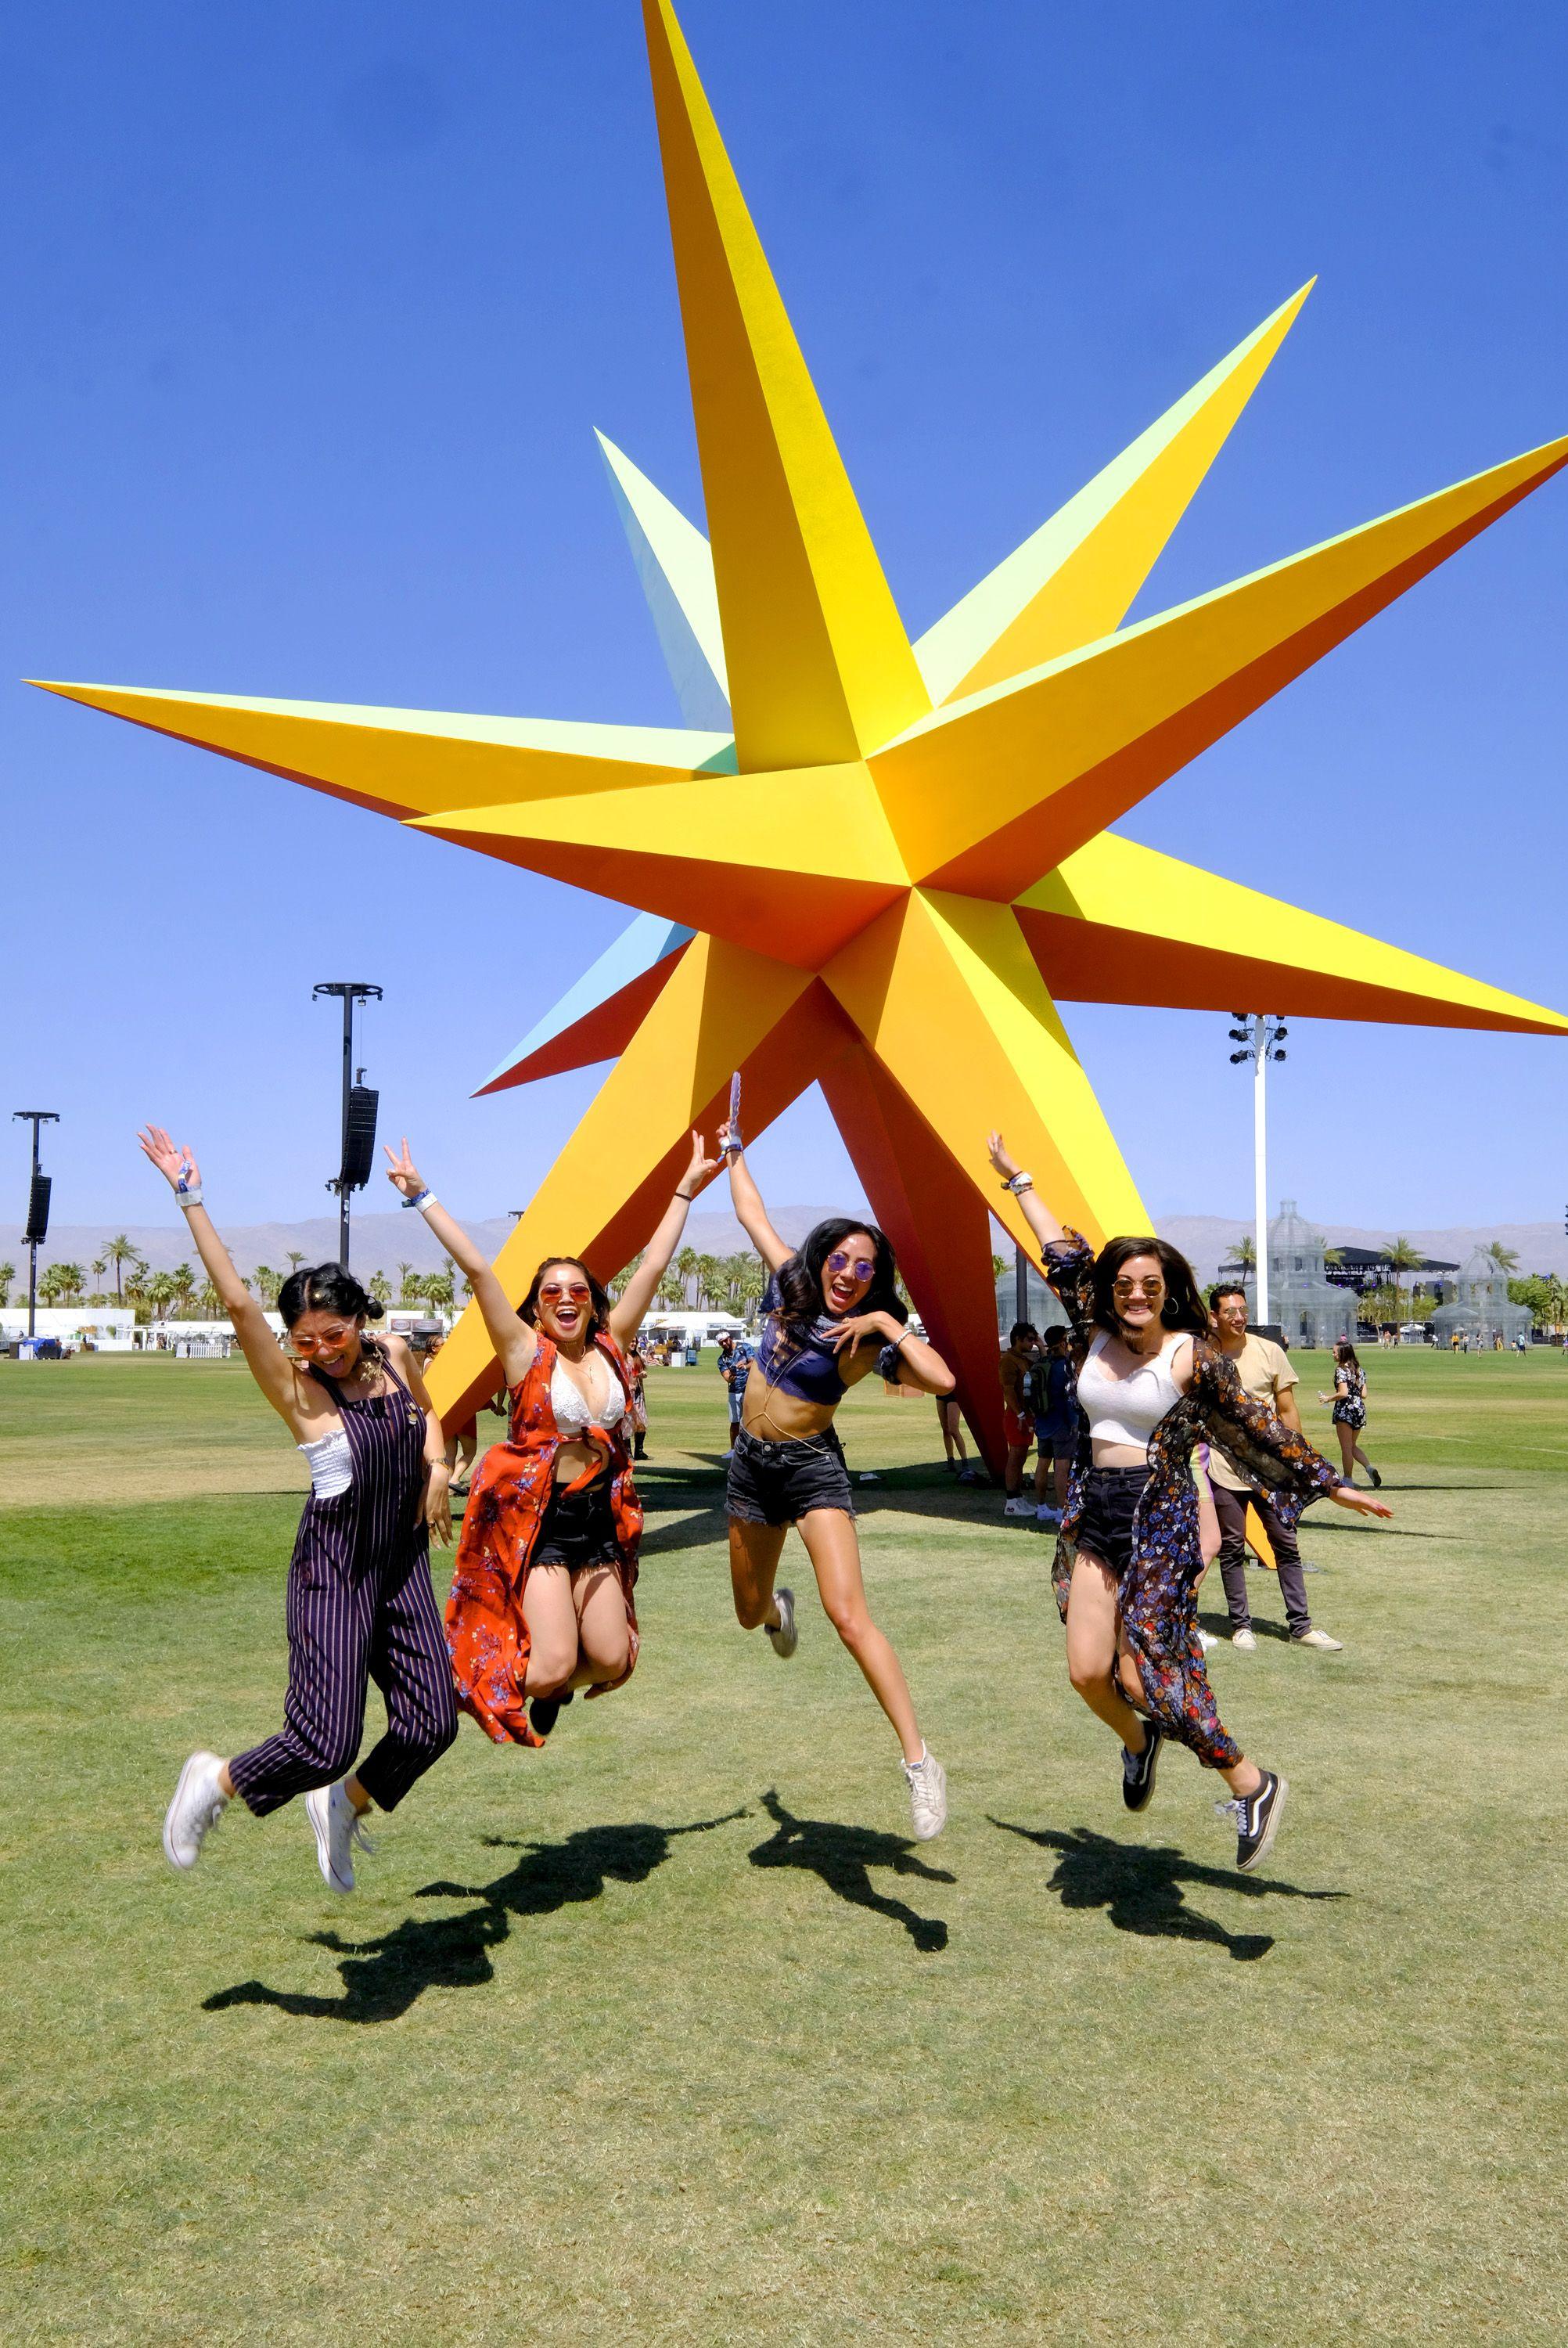 Coachella 2018: Musical Highlights From Saturday 106.3